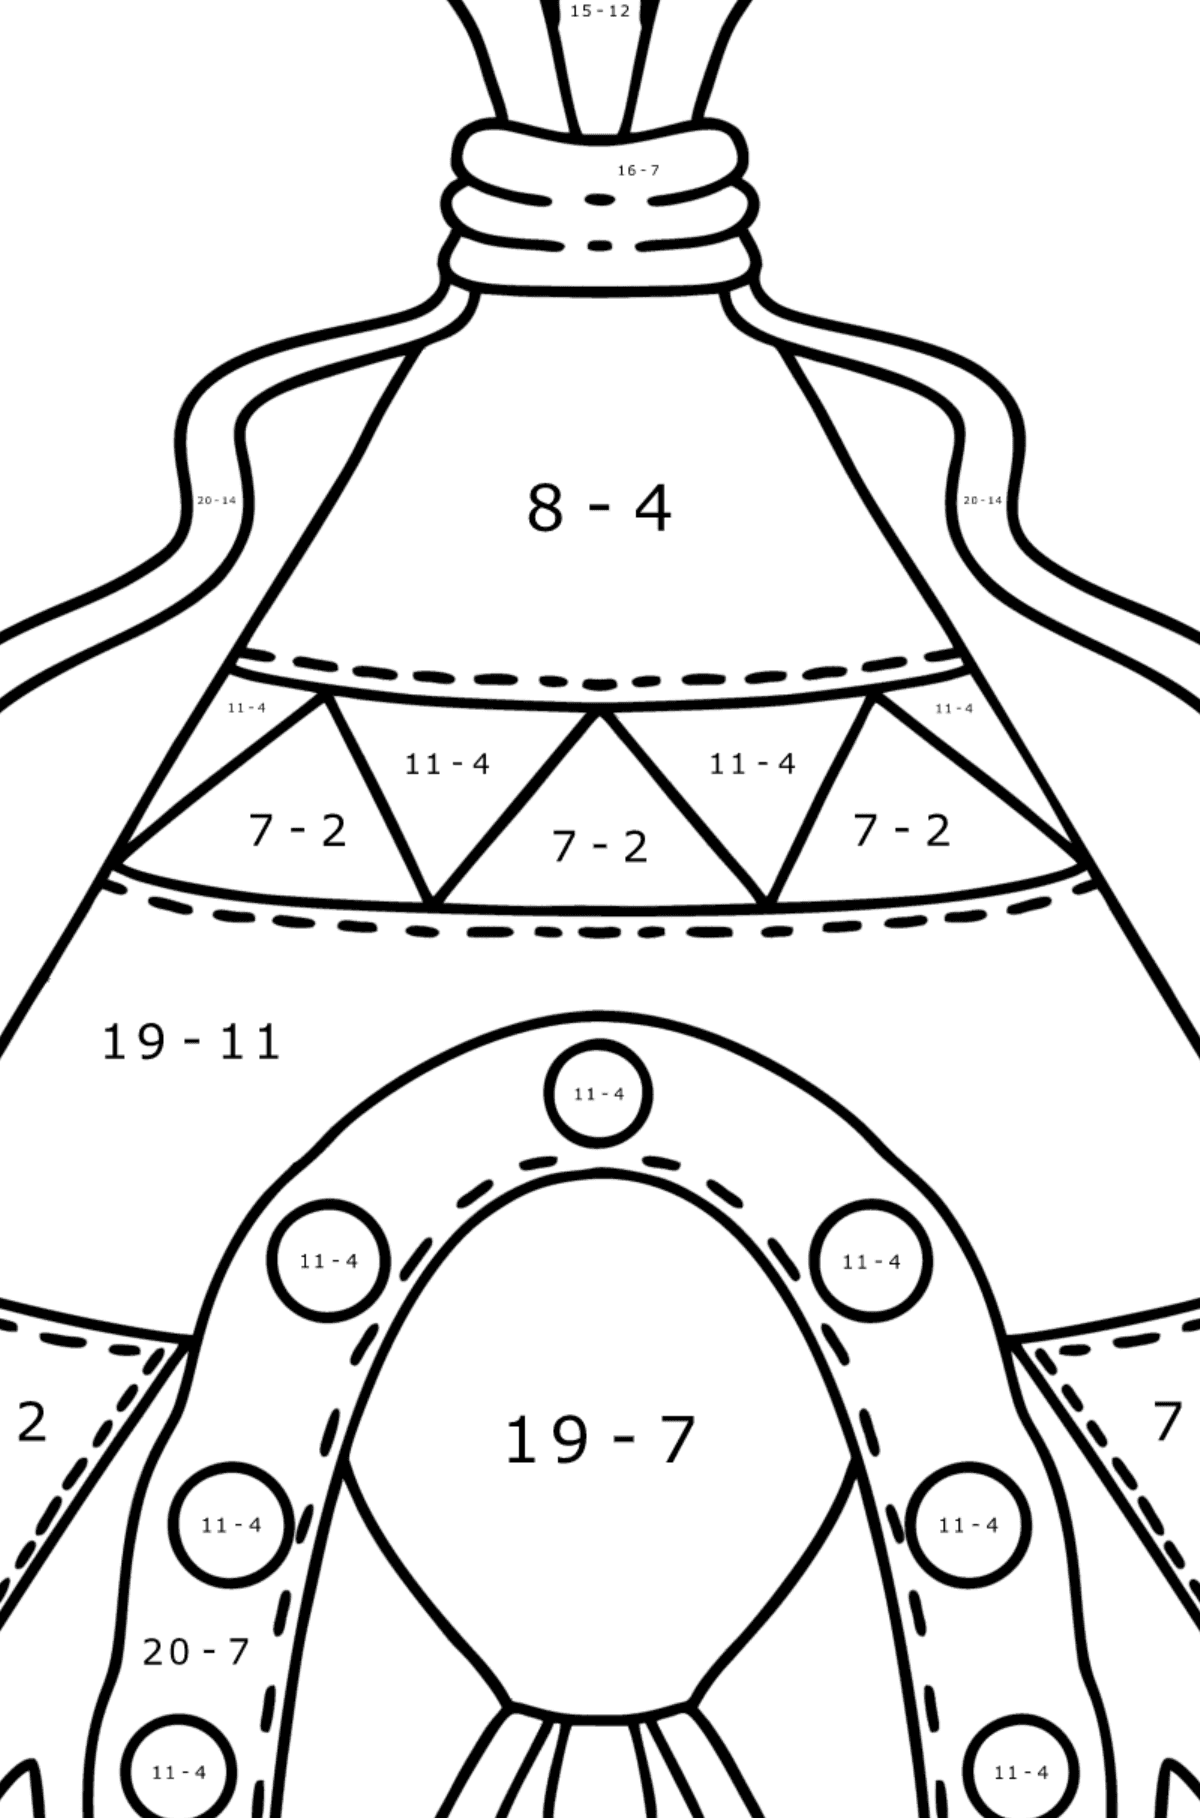 Tepee coloring page - Math Coloring - Subtraction for Kids